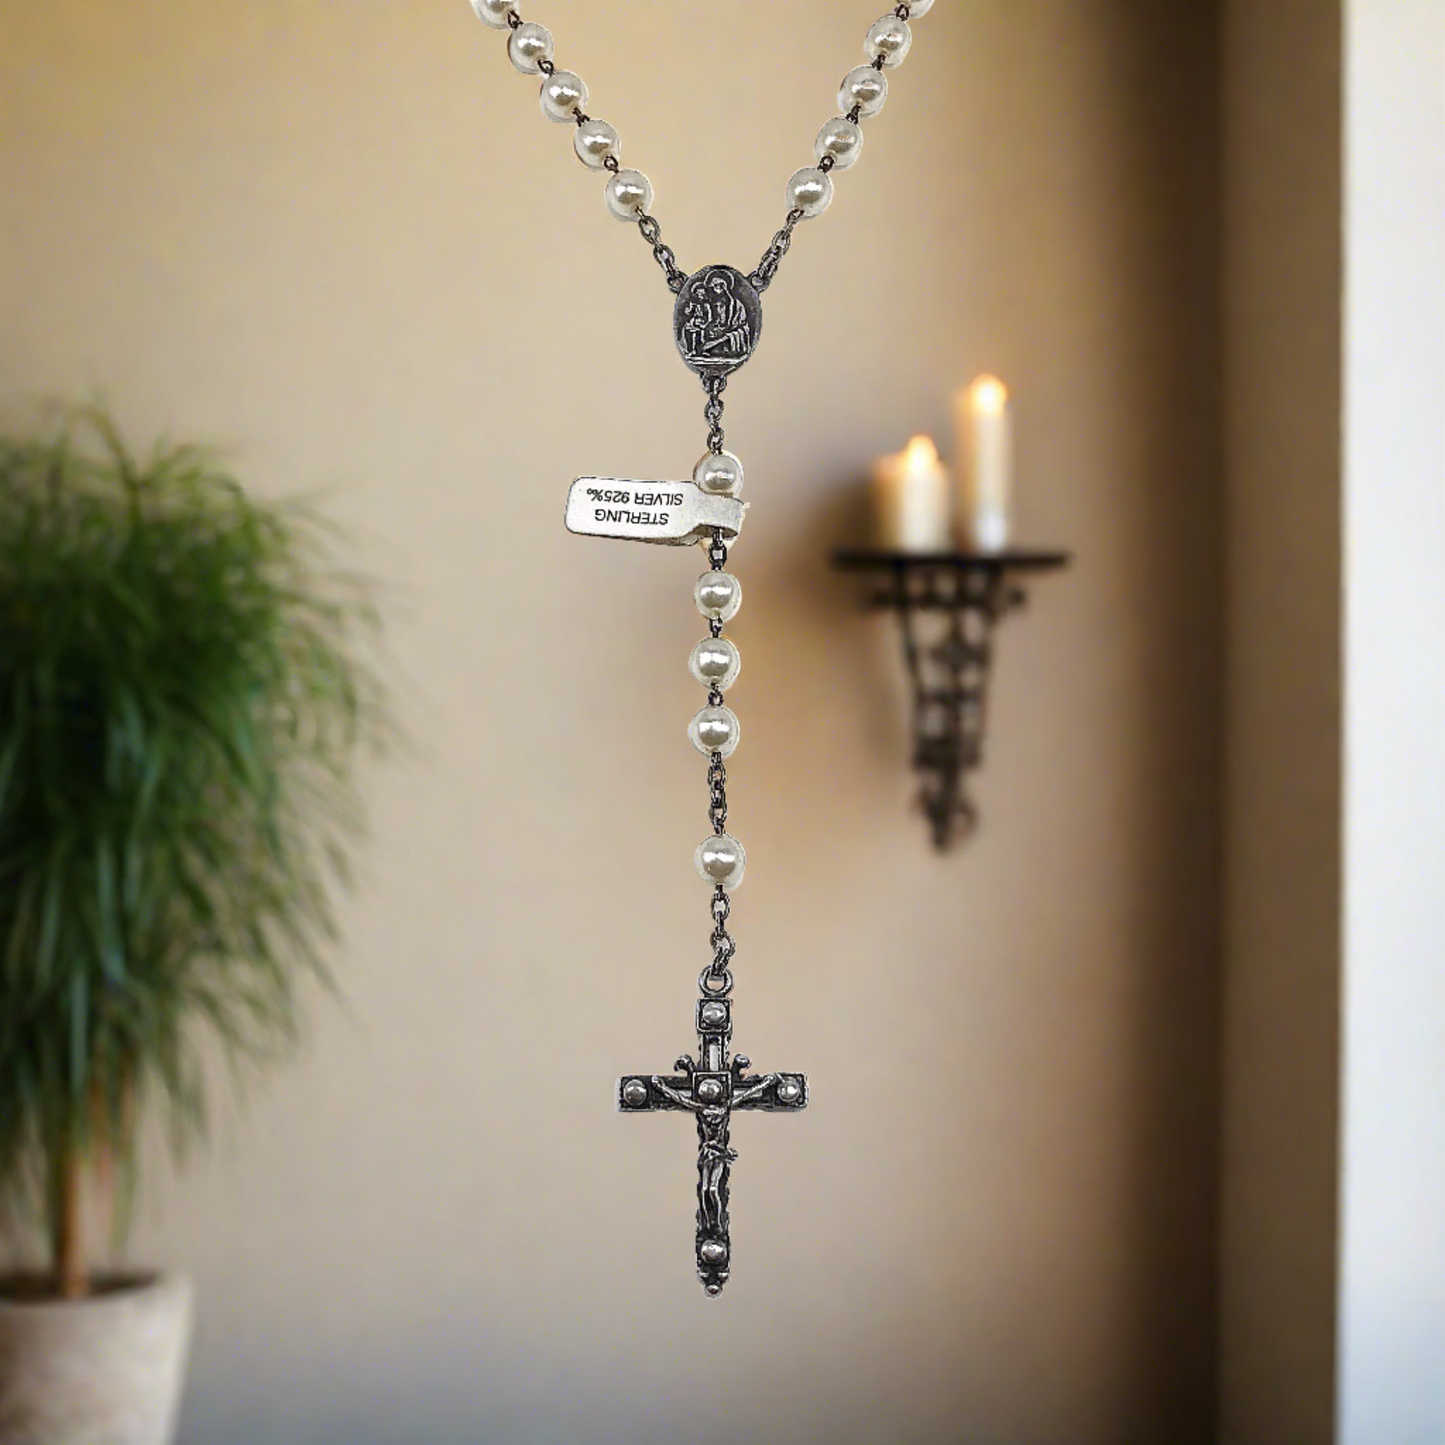 23 inch Sterling Silver White Rosary Bead Style Crucifix Cross Necklace